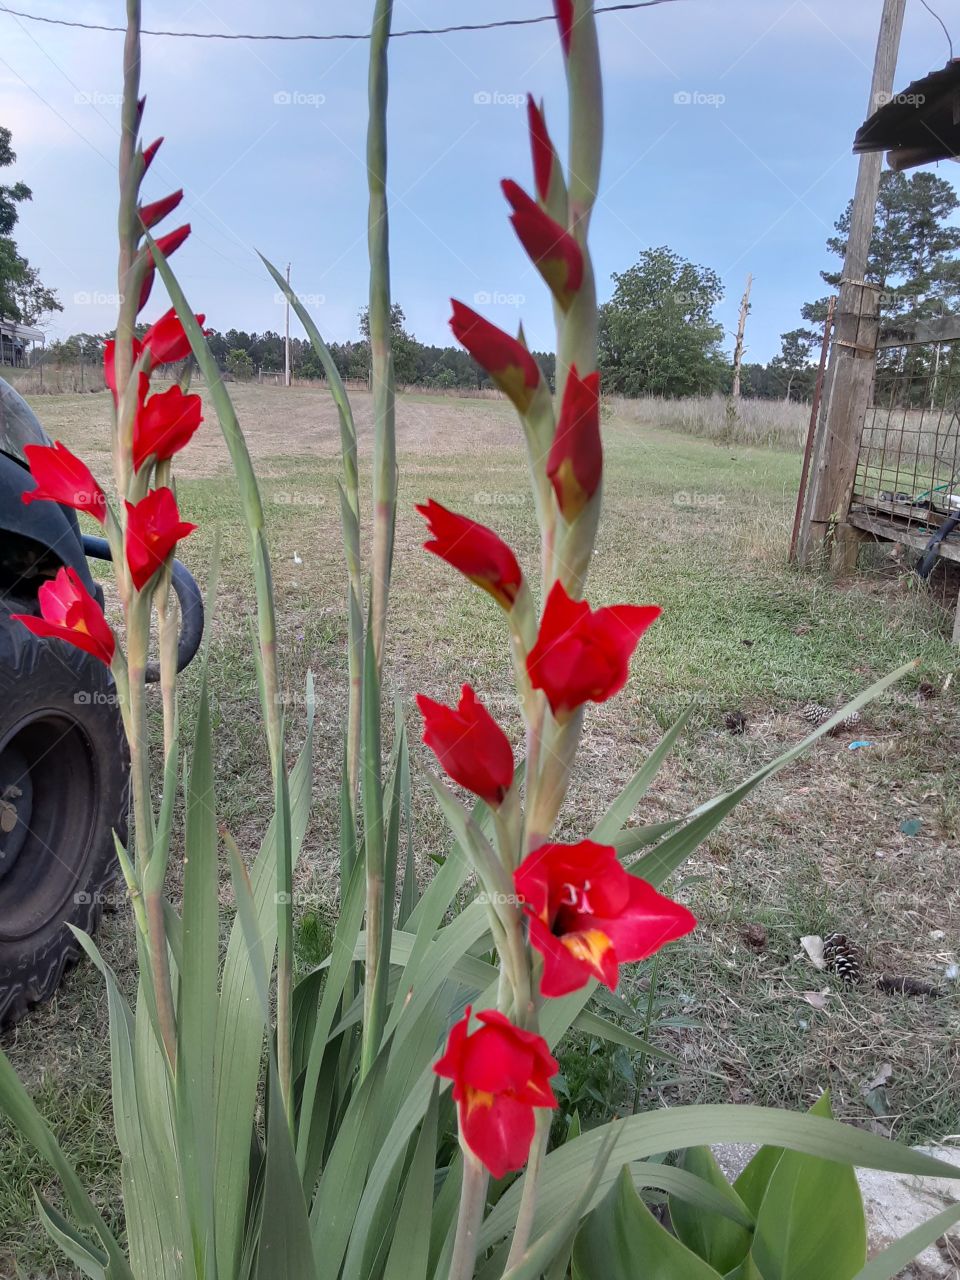 Glad to See these Glads